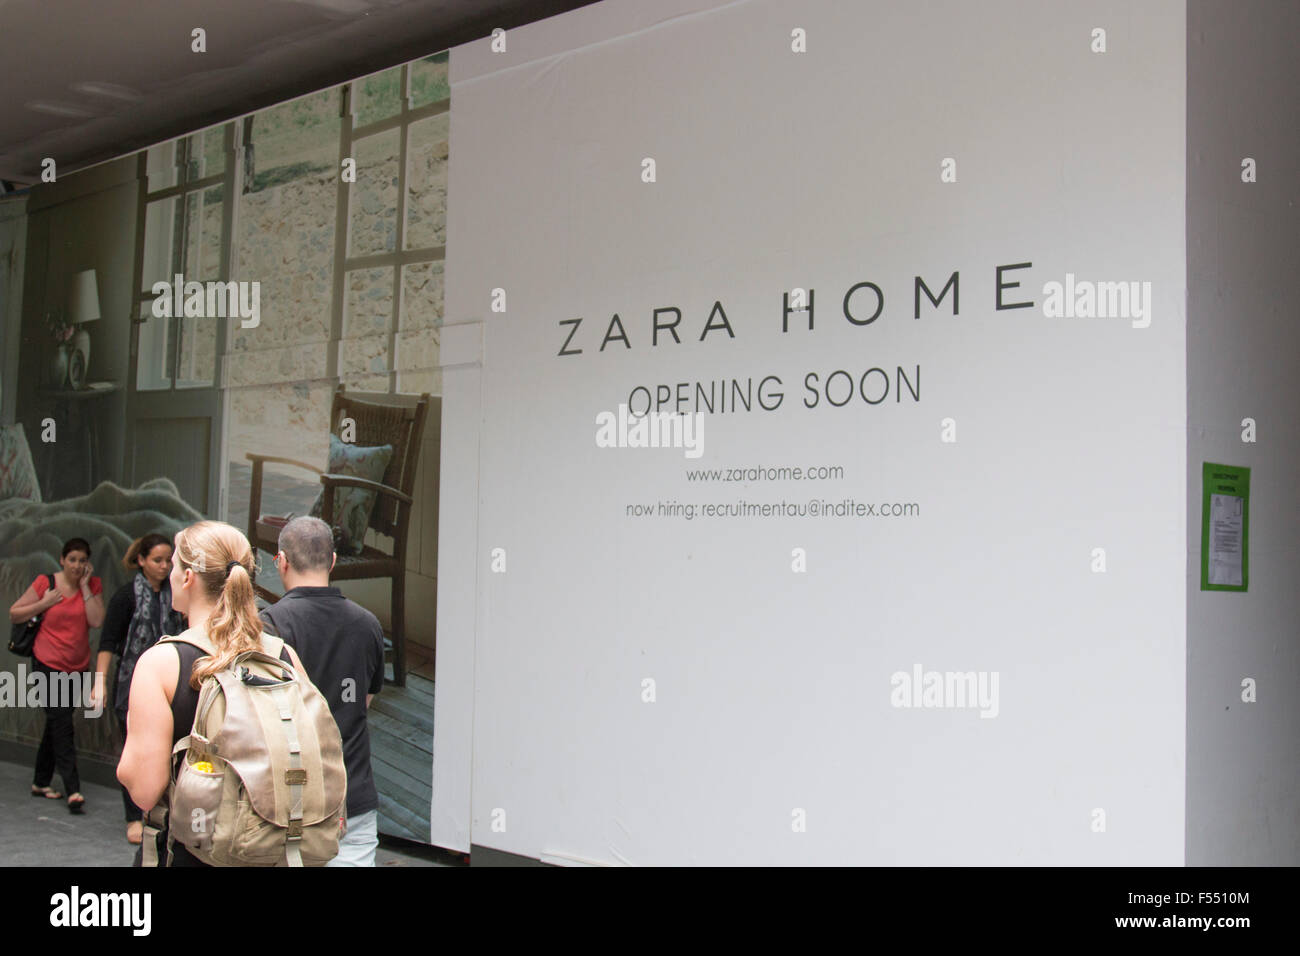 Sydney, Australia. 28th Oct, 2015. Spanish Retail Giant Zara nears the  opening of its Home store in Sydney's Pitt Street, just metres from its  exisiting Zara Clothing store in Pitt Street. Credit: